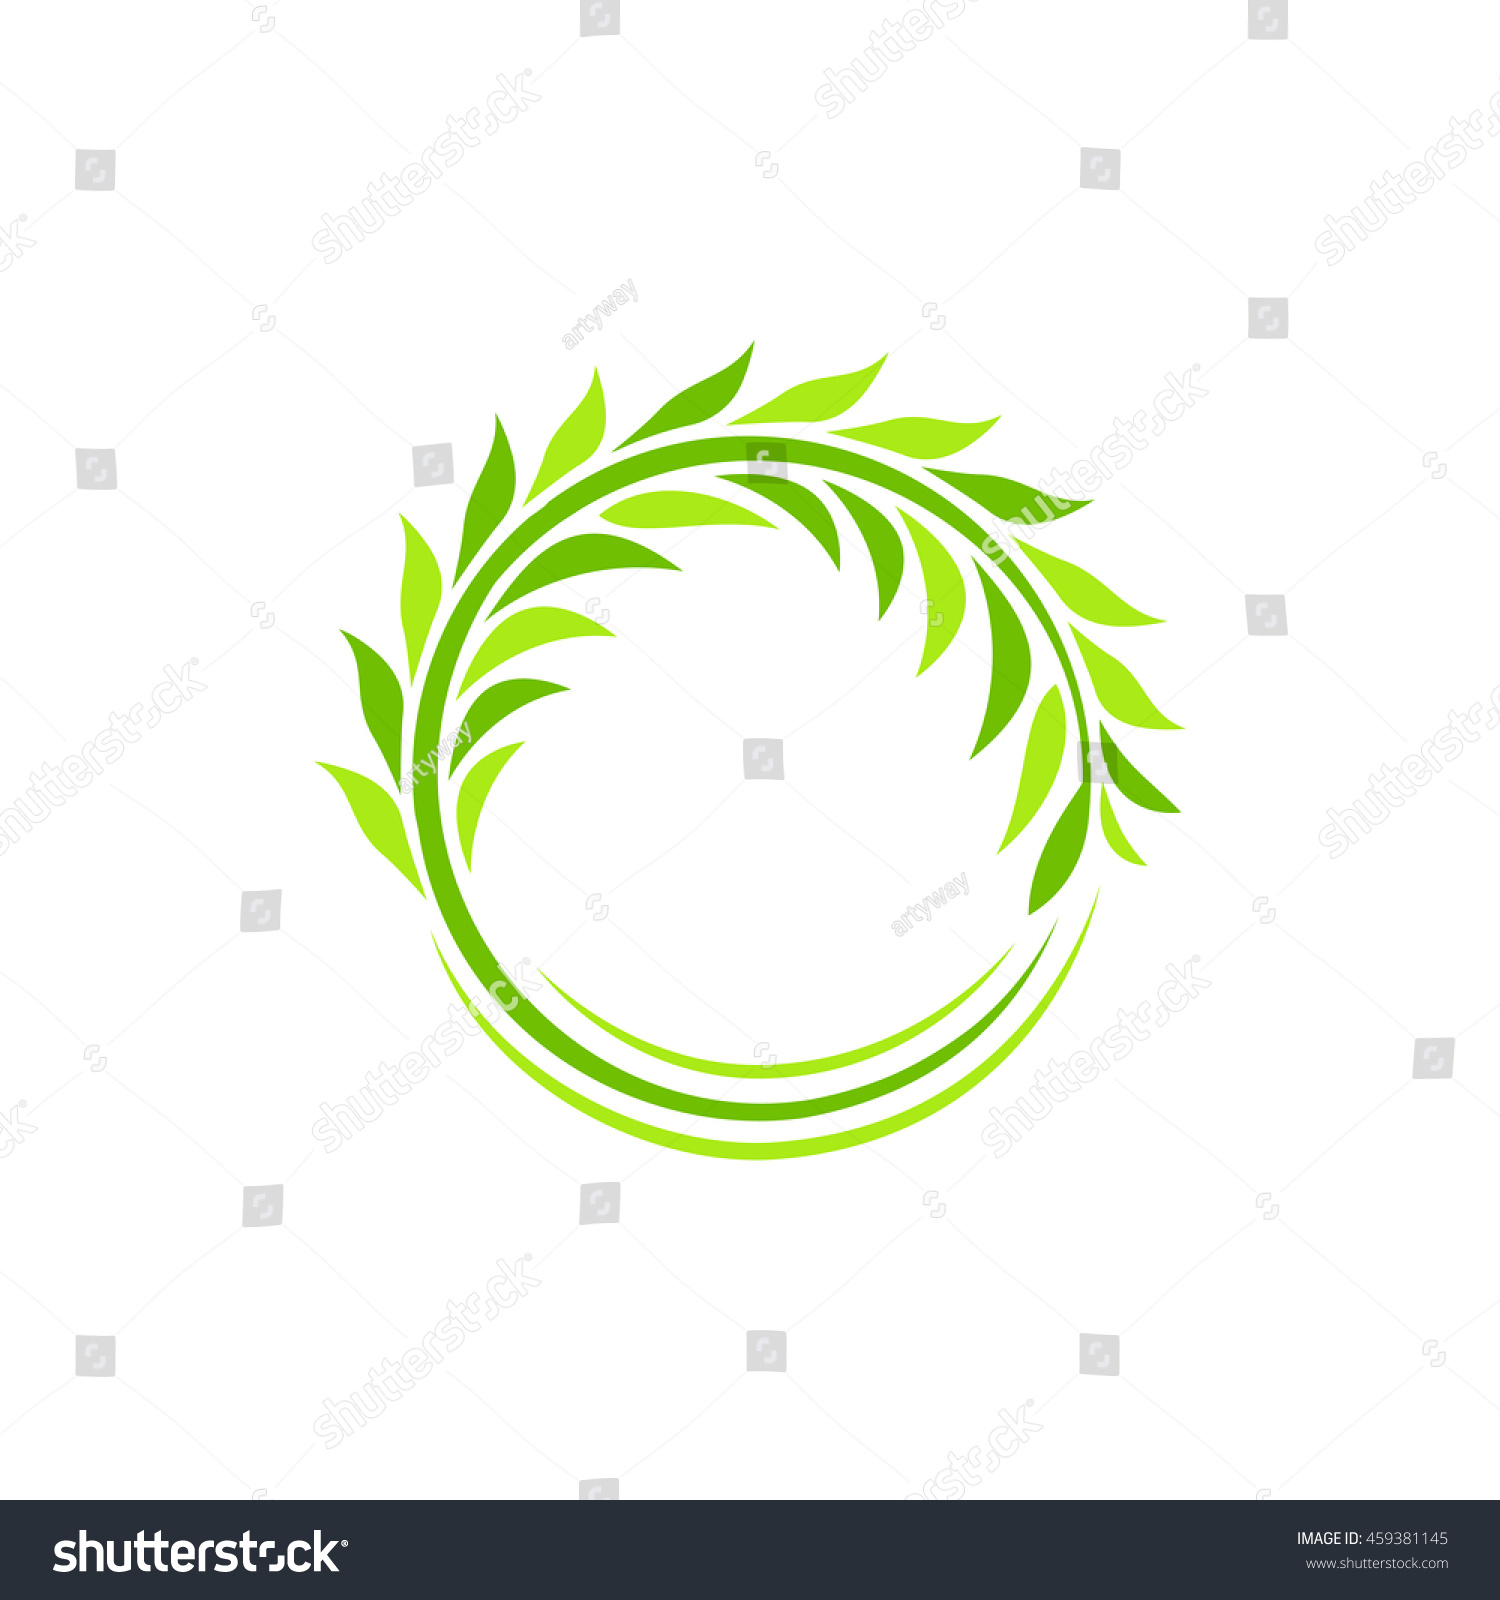 SVG of Isolated abstract round shape green color plant vector logo. Wheat ear logotype. Circular wreath illustration. Agricultural industry element. Leaves sign. Natural symbol. svg